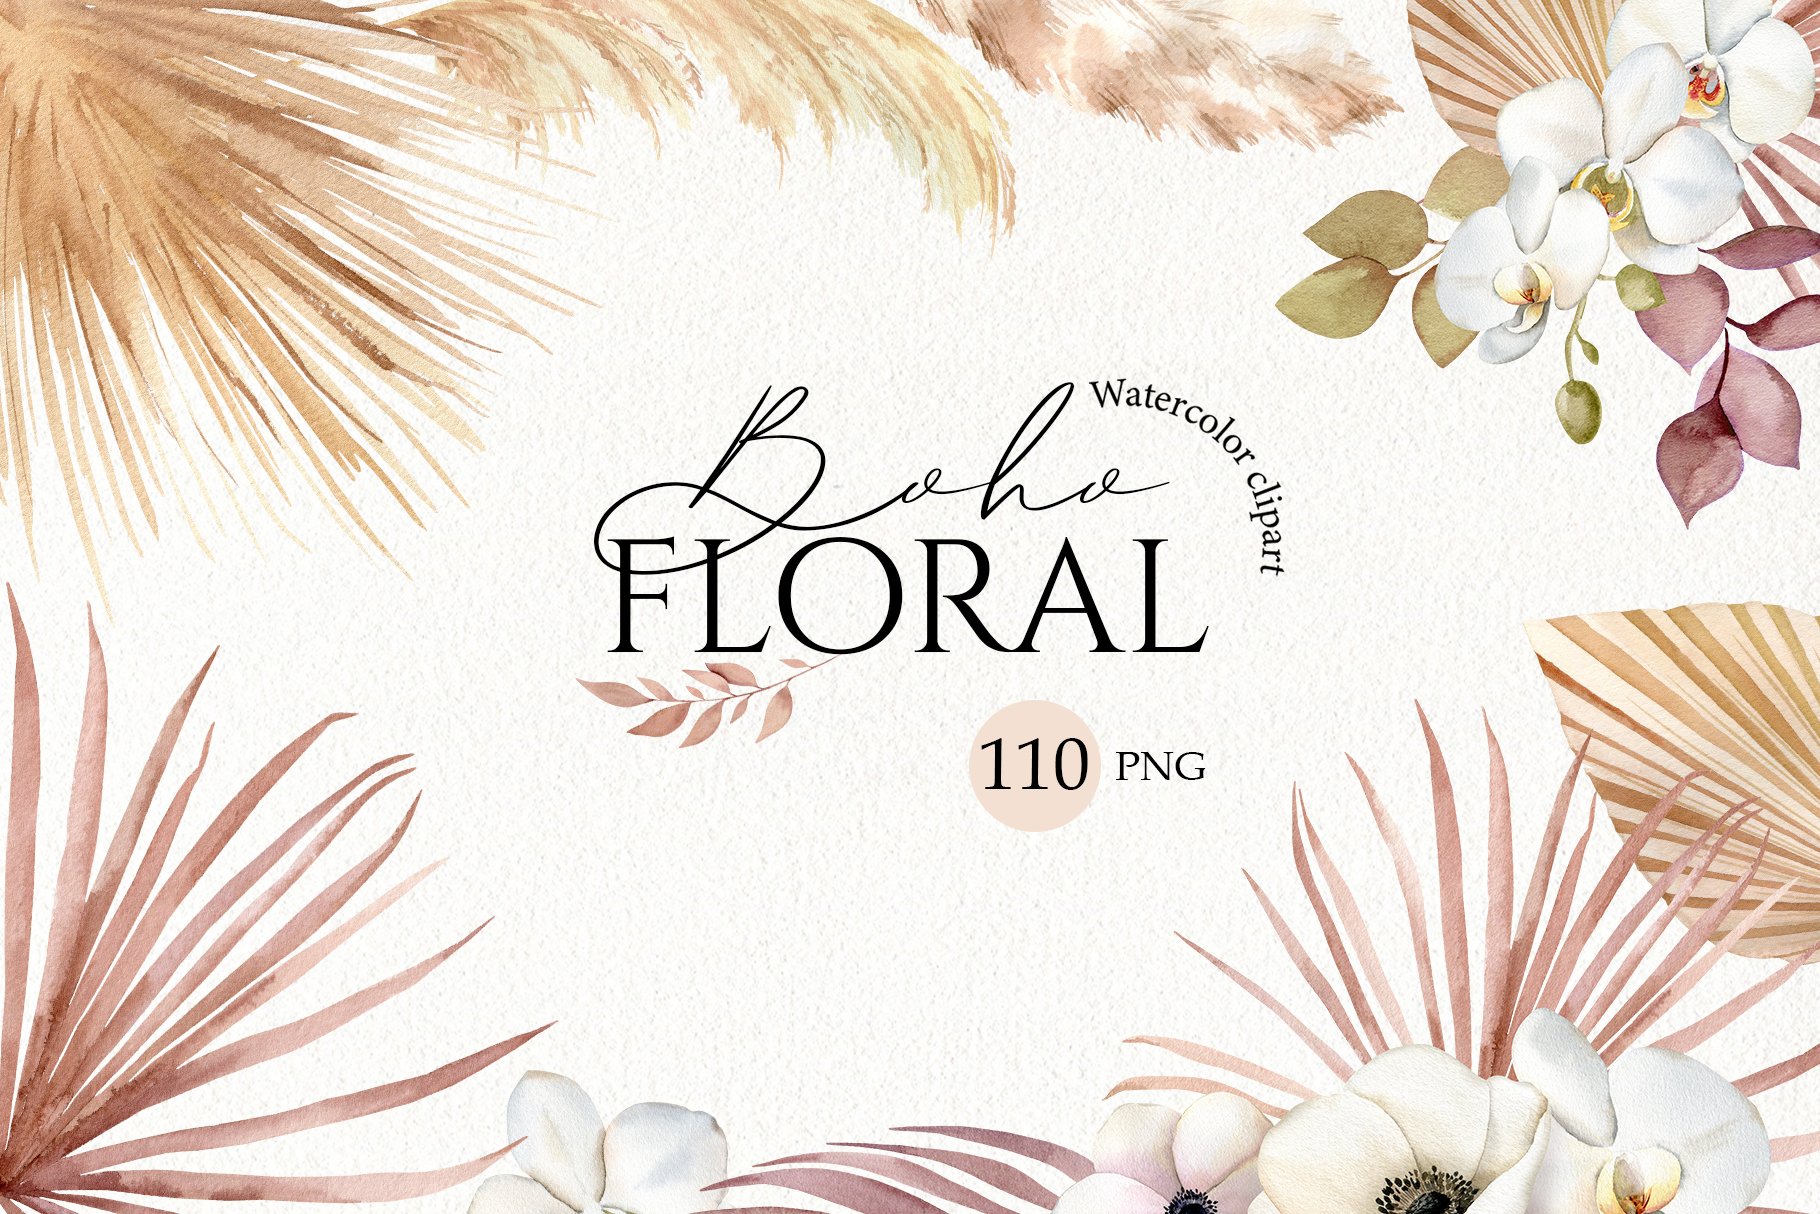 Watercolor boho floral clipart cover image.